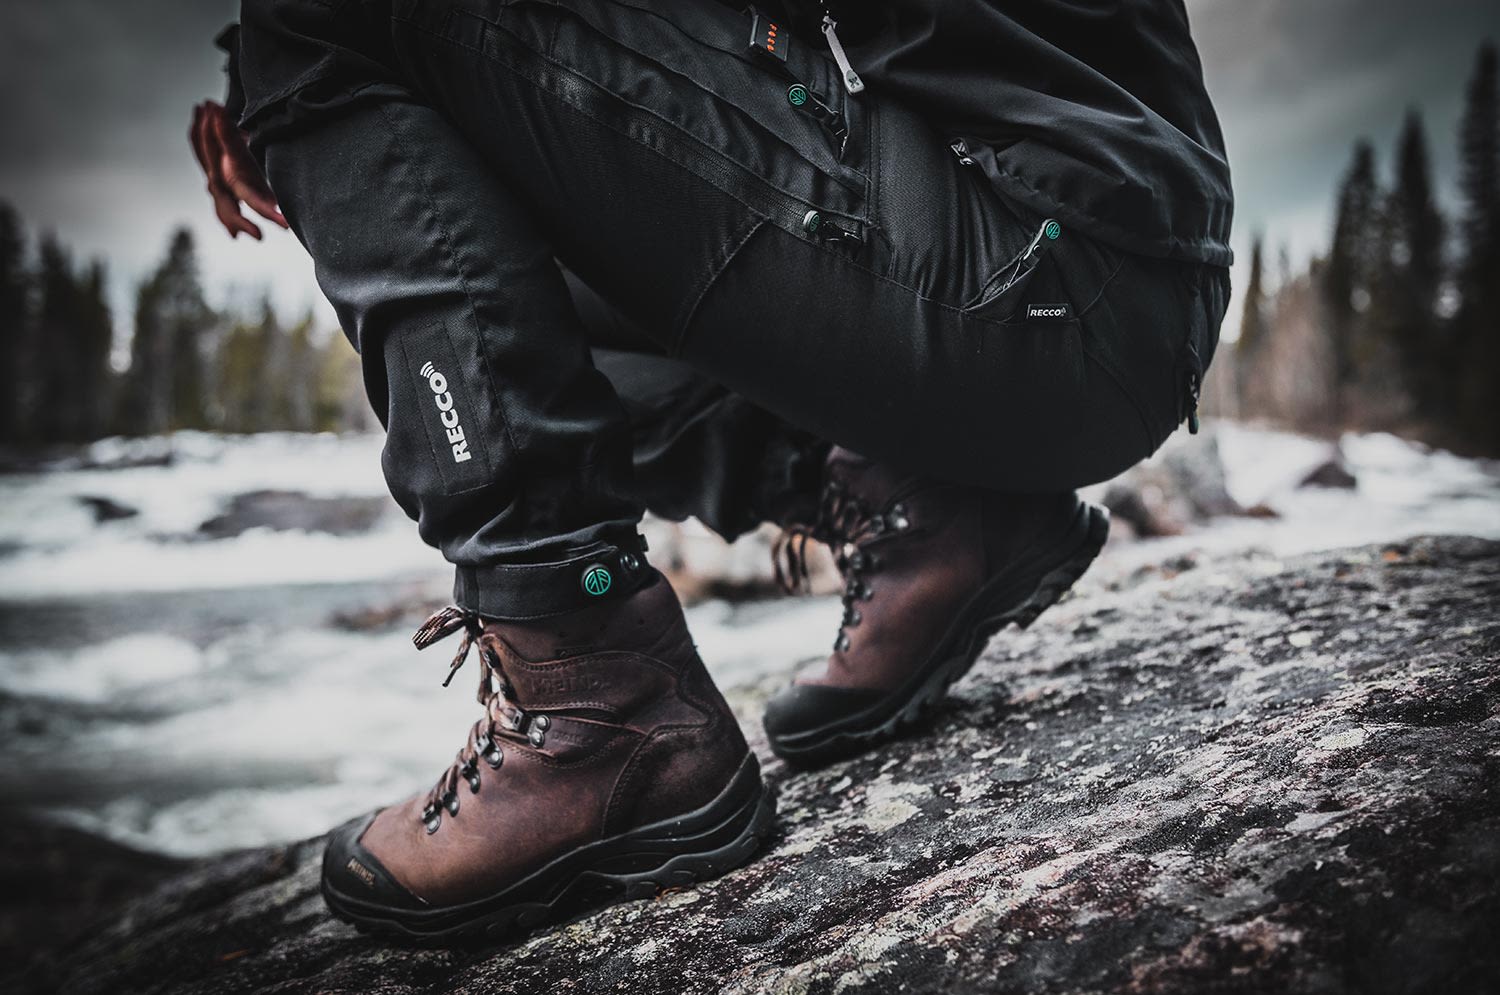 Beyond Nordic - The BN001 survival pants is a highly